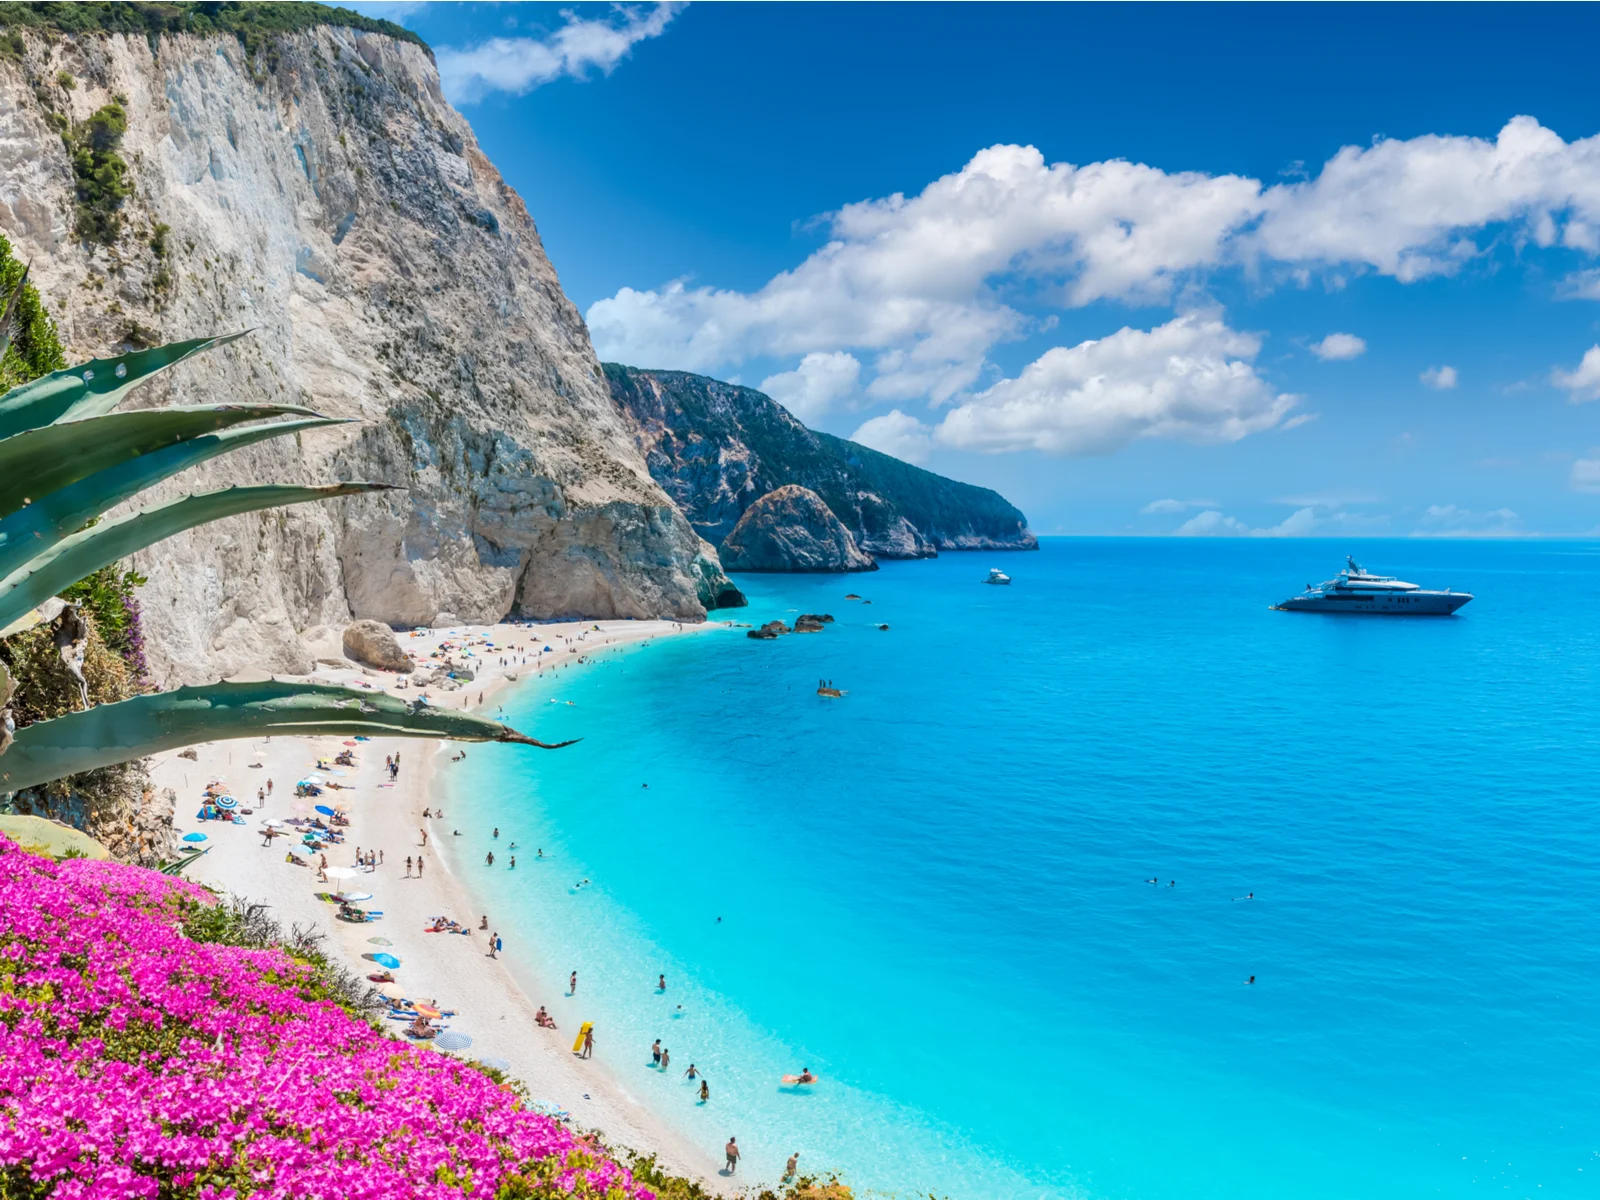 Porto Katsiki, one of the best beaches in Greece, as seen from a hilltop with flowers on the left side of the photo